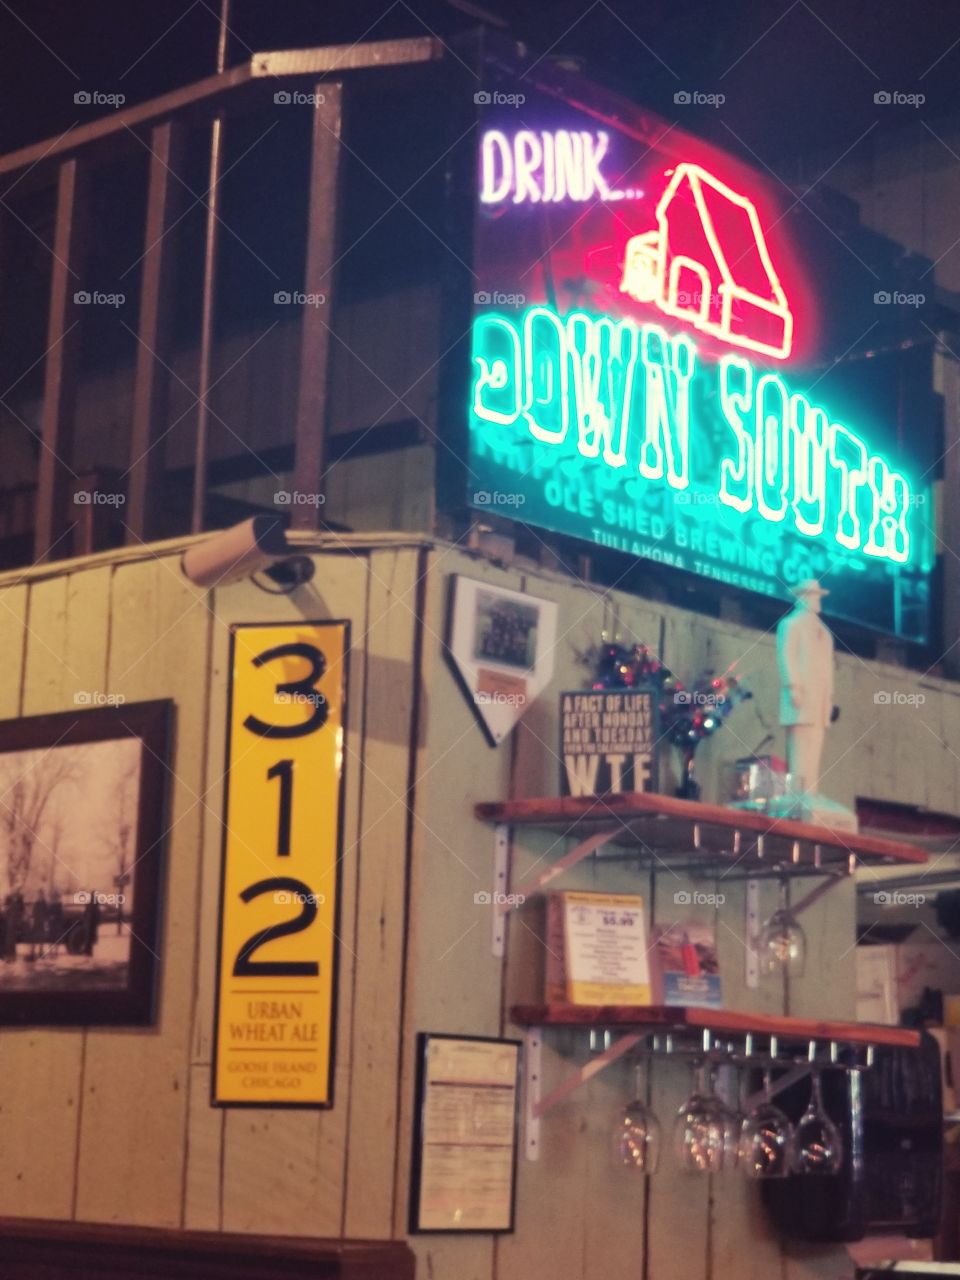 Neon glow of colorful sign promoting Down South atmosphere, lights up inside of typical Americana bar scene speckled with vintage signage 312, glasses, and pictures.